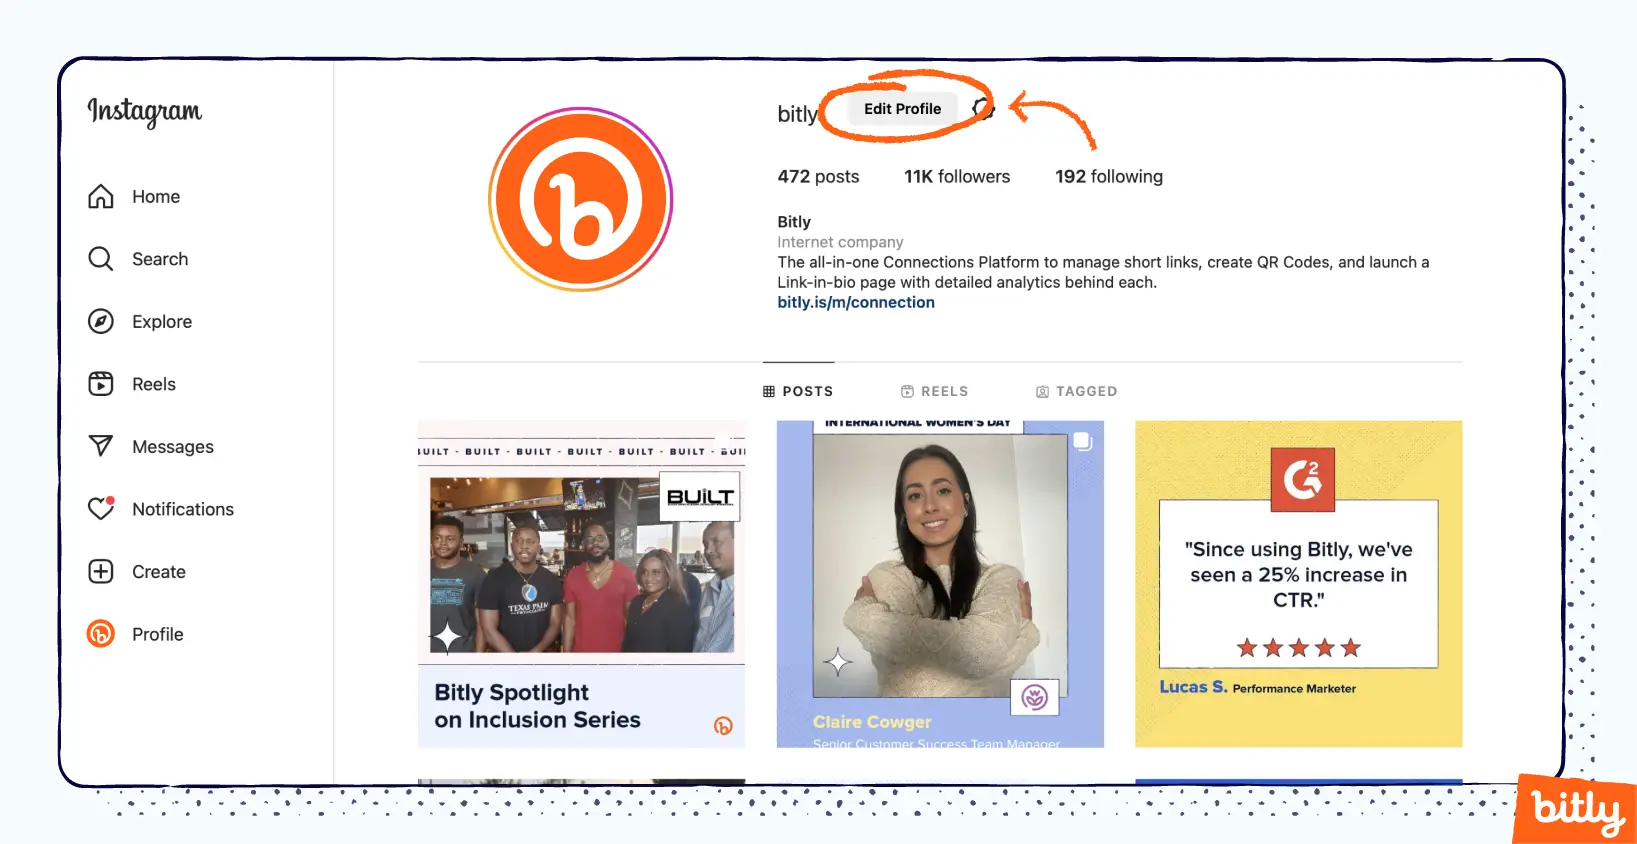 Bitly’s Instagram profile with an orange marker pointing to and circling around “Edit profile”.